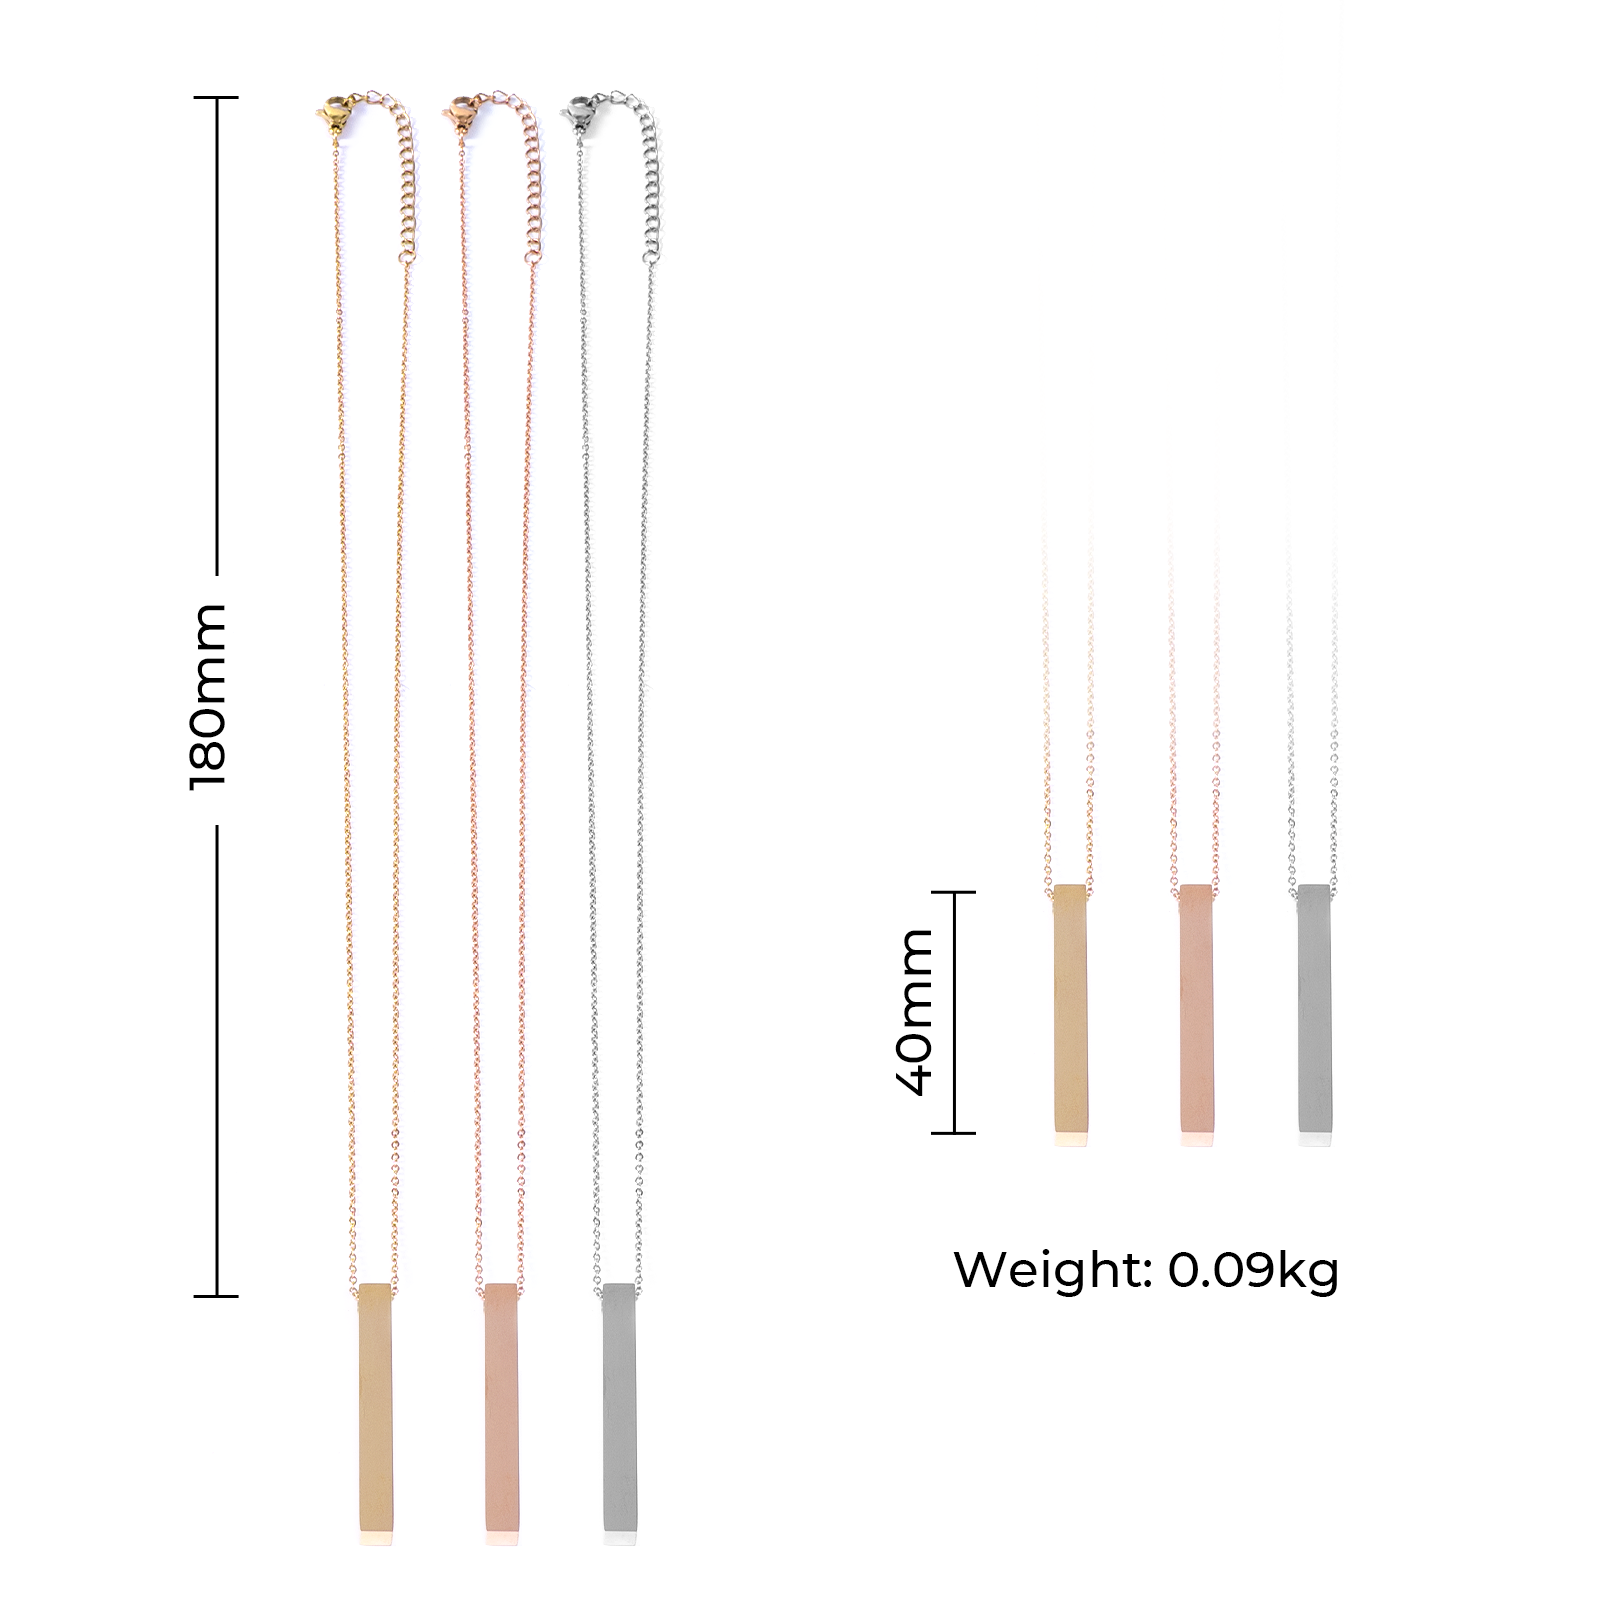 Stainless Steel Vertical Bar Necklace (6pcs)